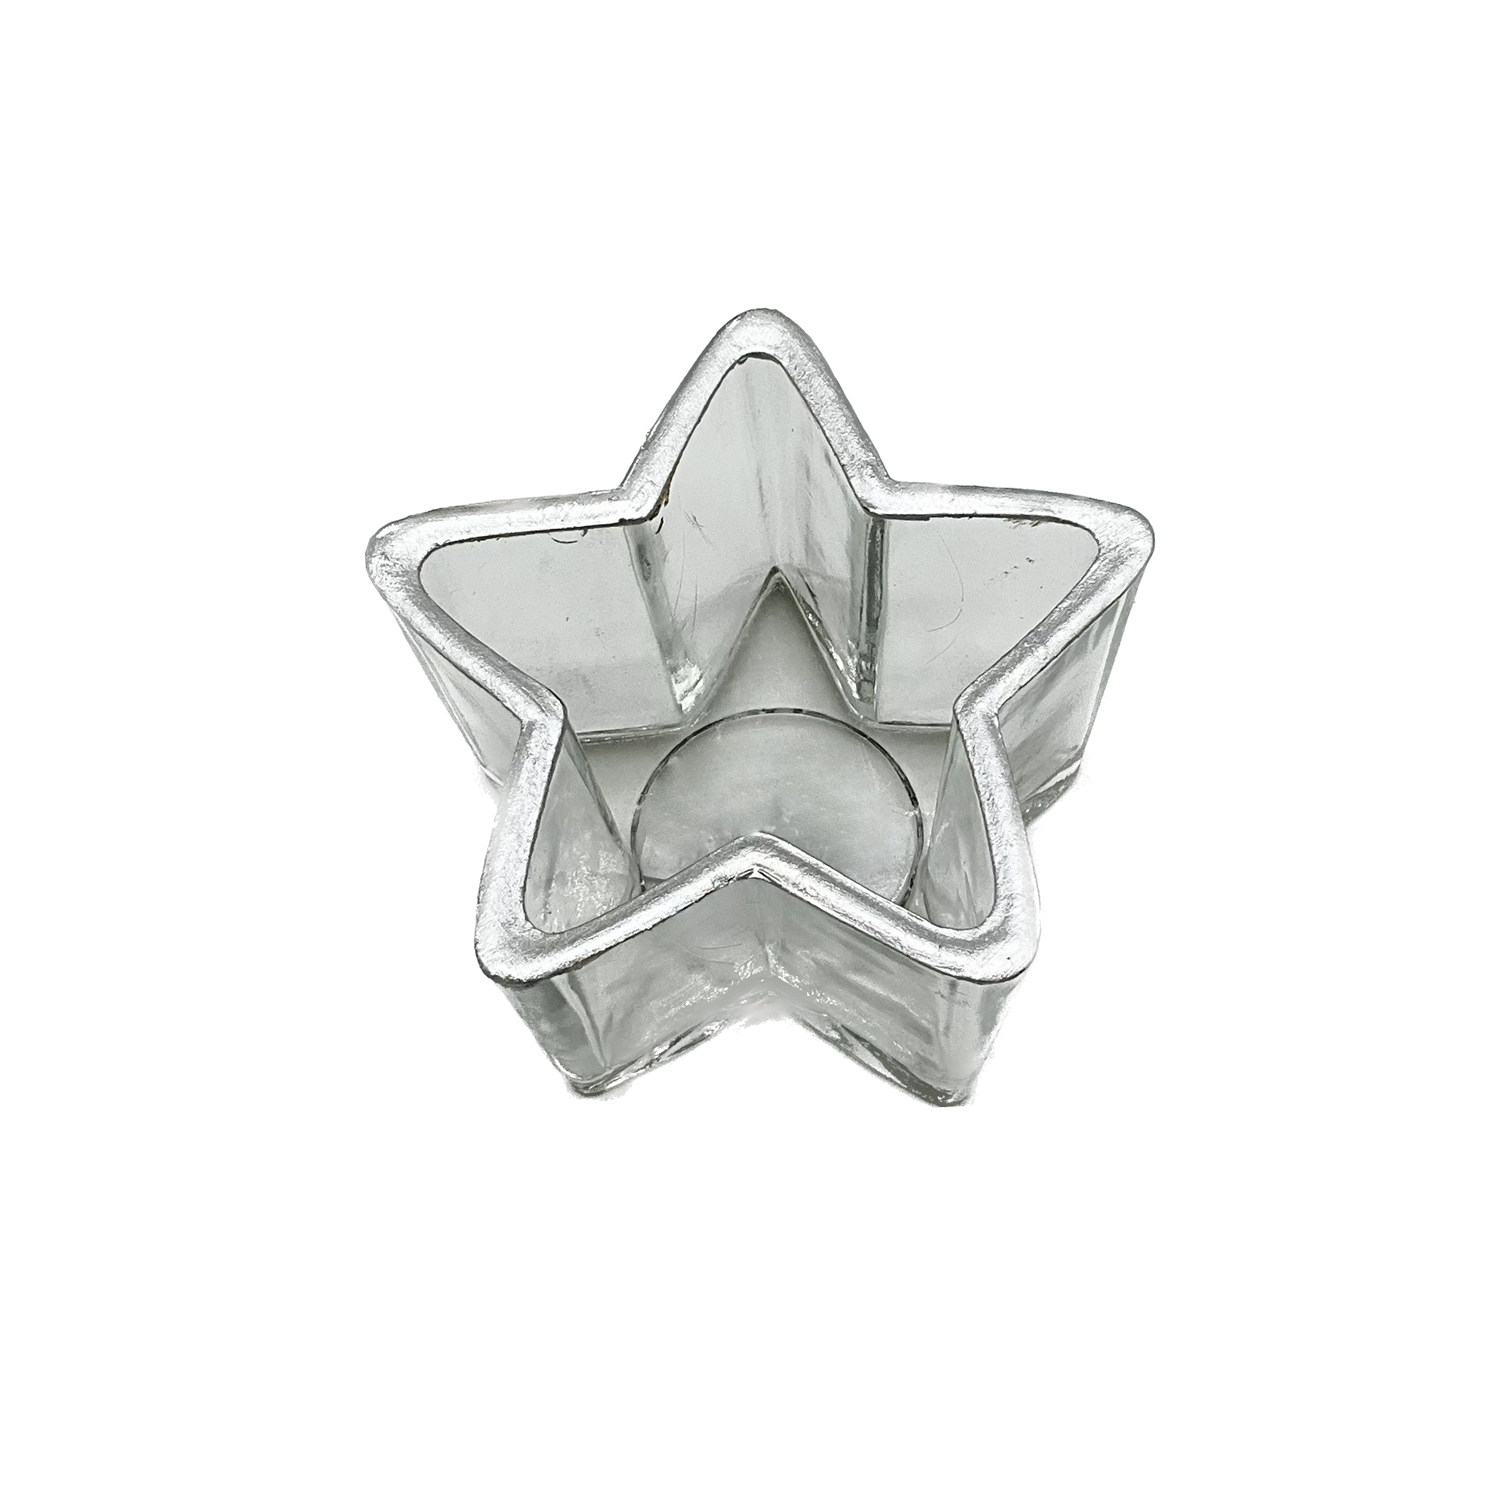 Glass Star Tealight Holder With Silver Trim 8cm Gift